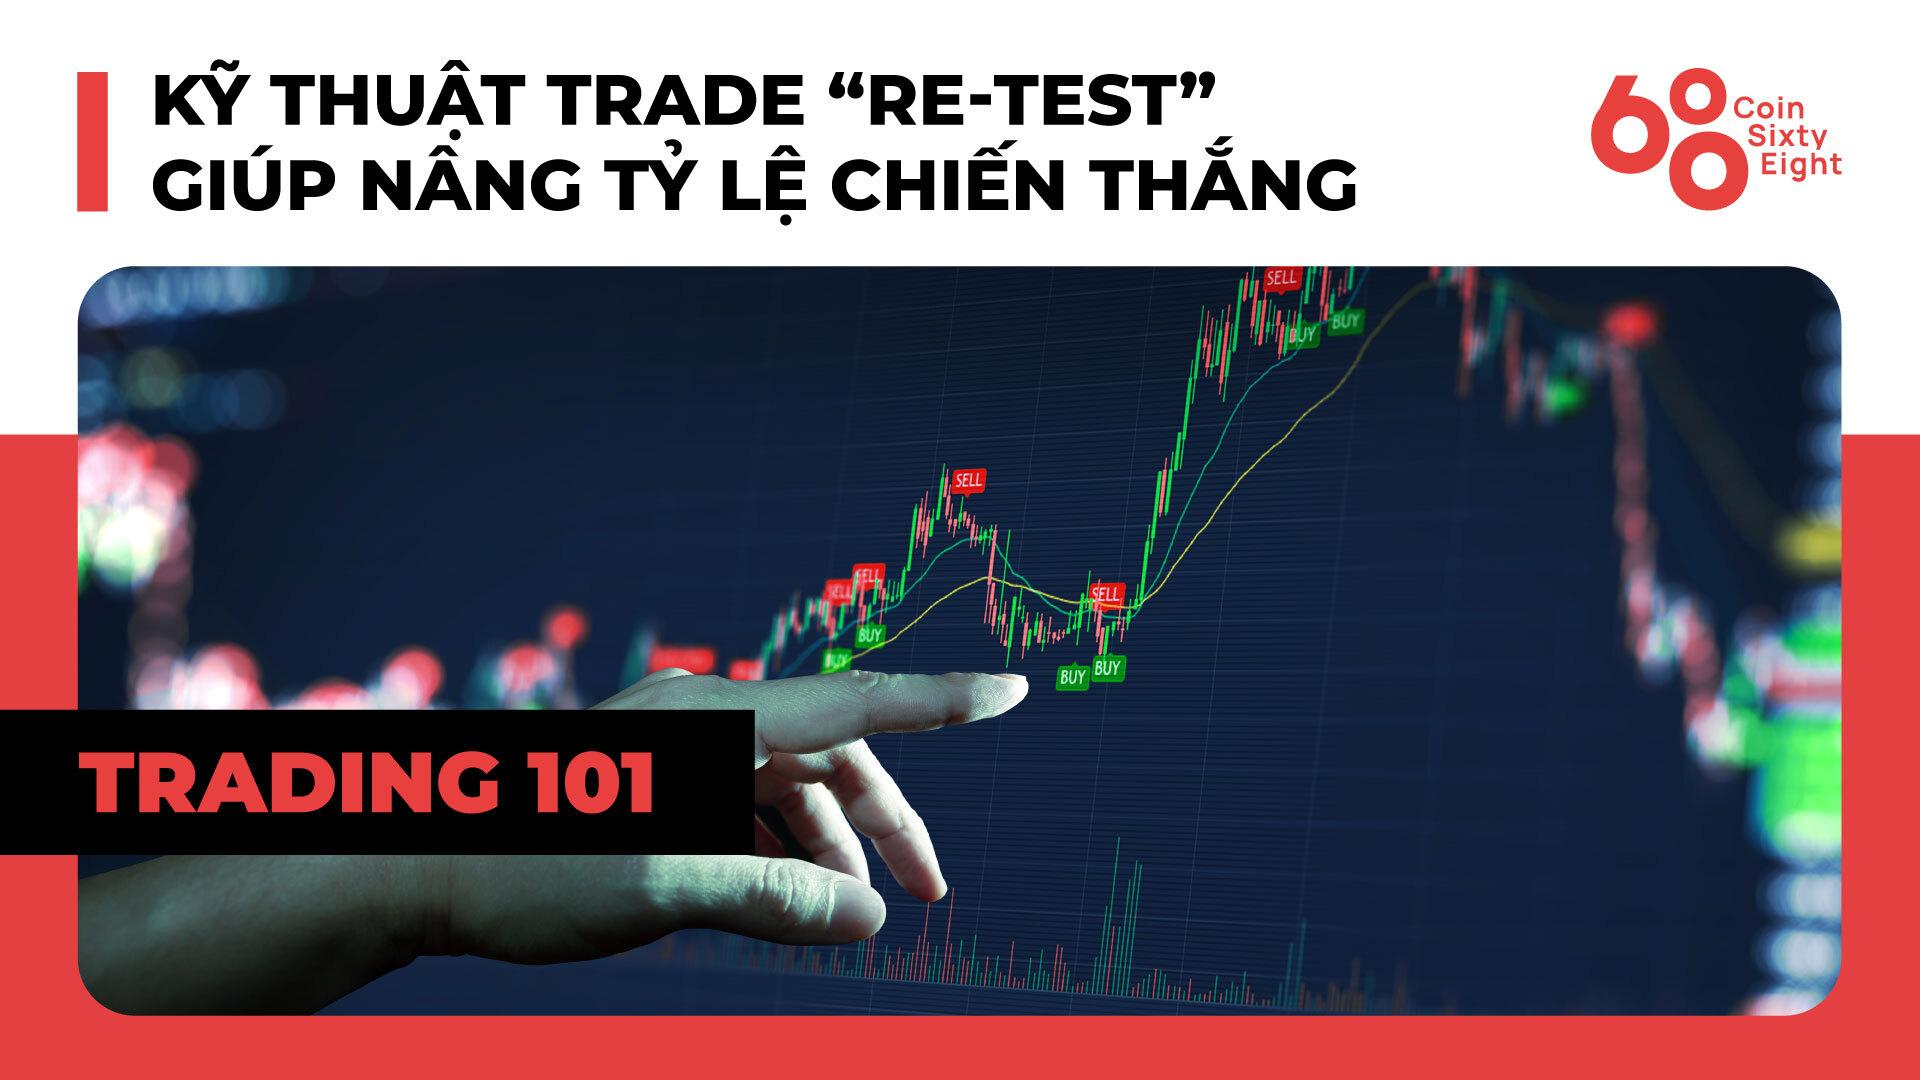 lop-giao-dich-101-price-action-trading-phan-17-ky-thuat-trade-retest-giup-nang-ty-le-chien-thang